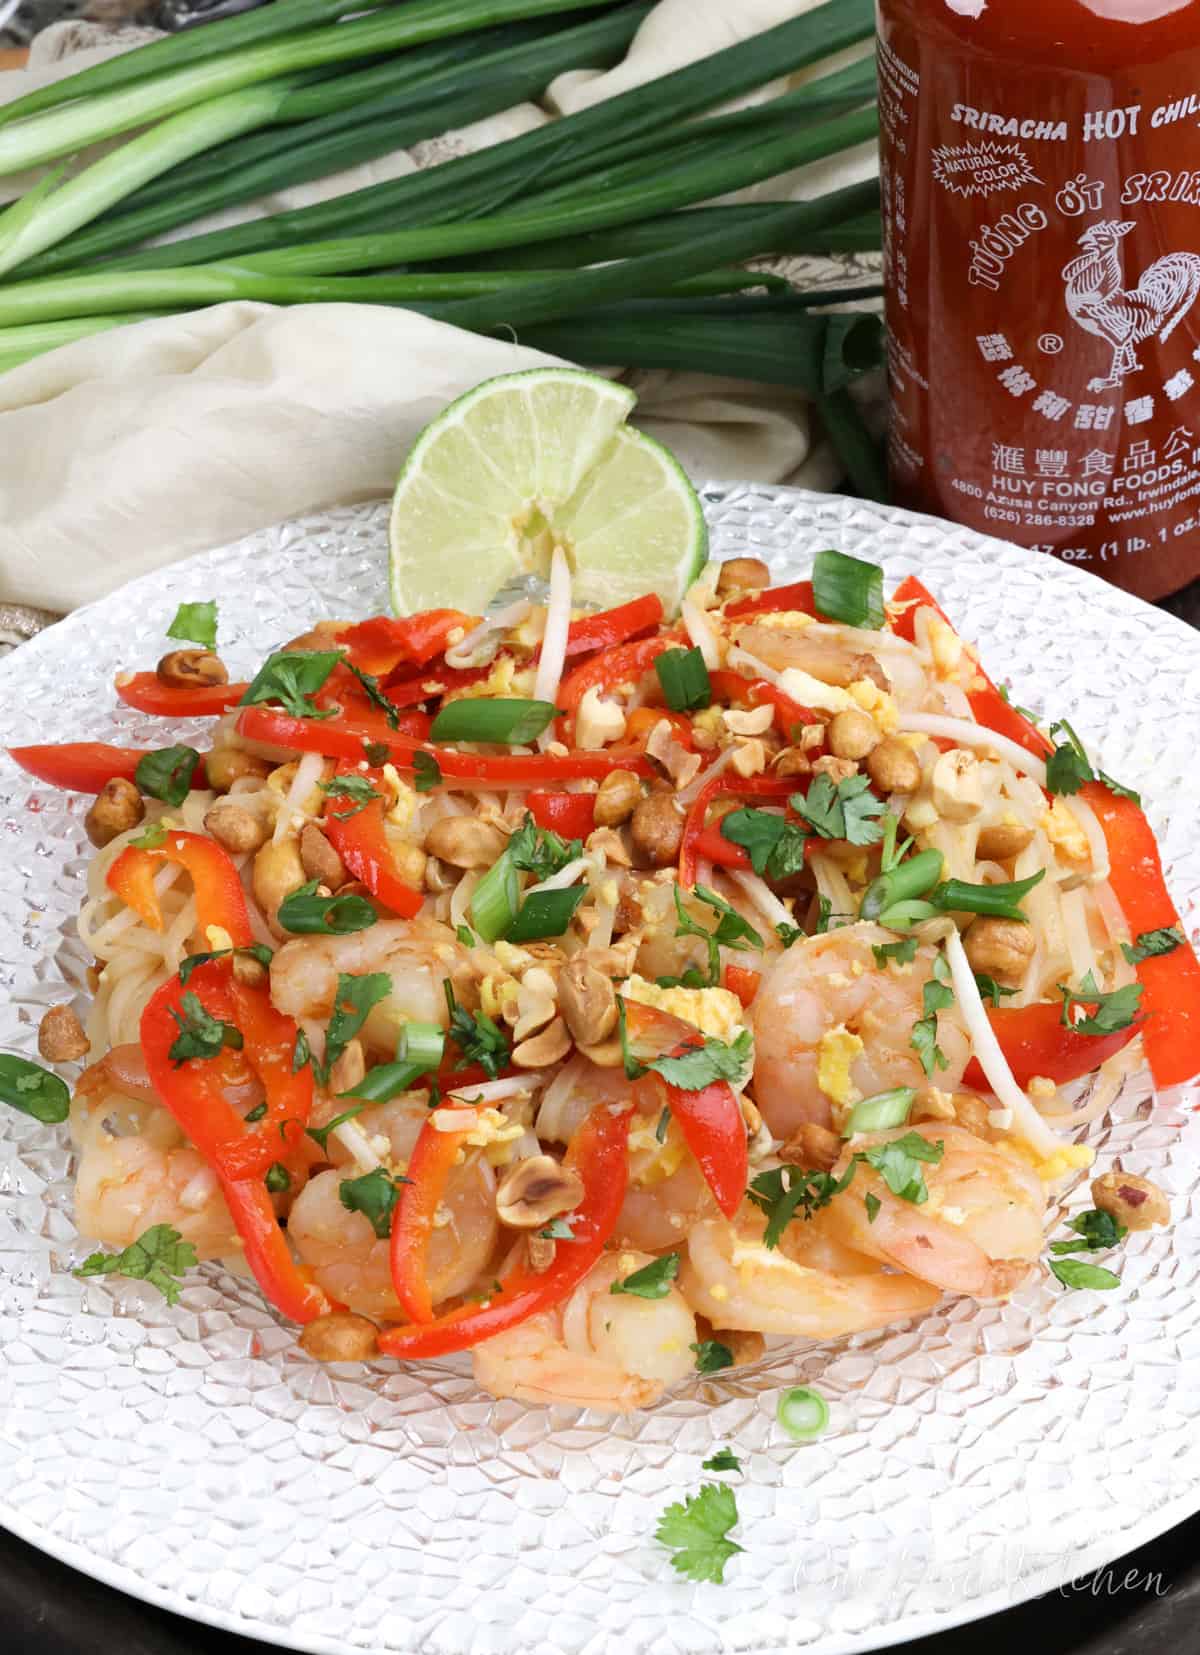 pad thai on a white plate next to two lime wedges, a bottle of sriracha, and several green onions